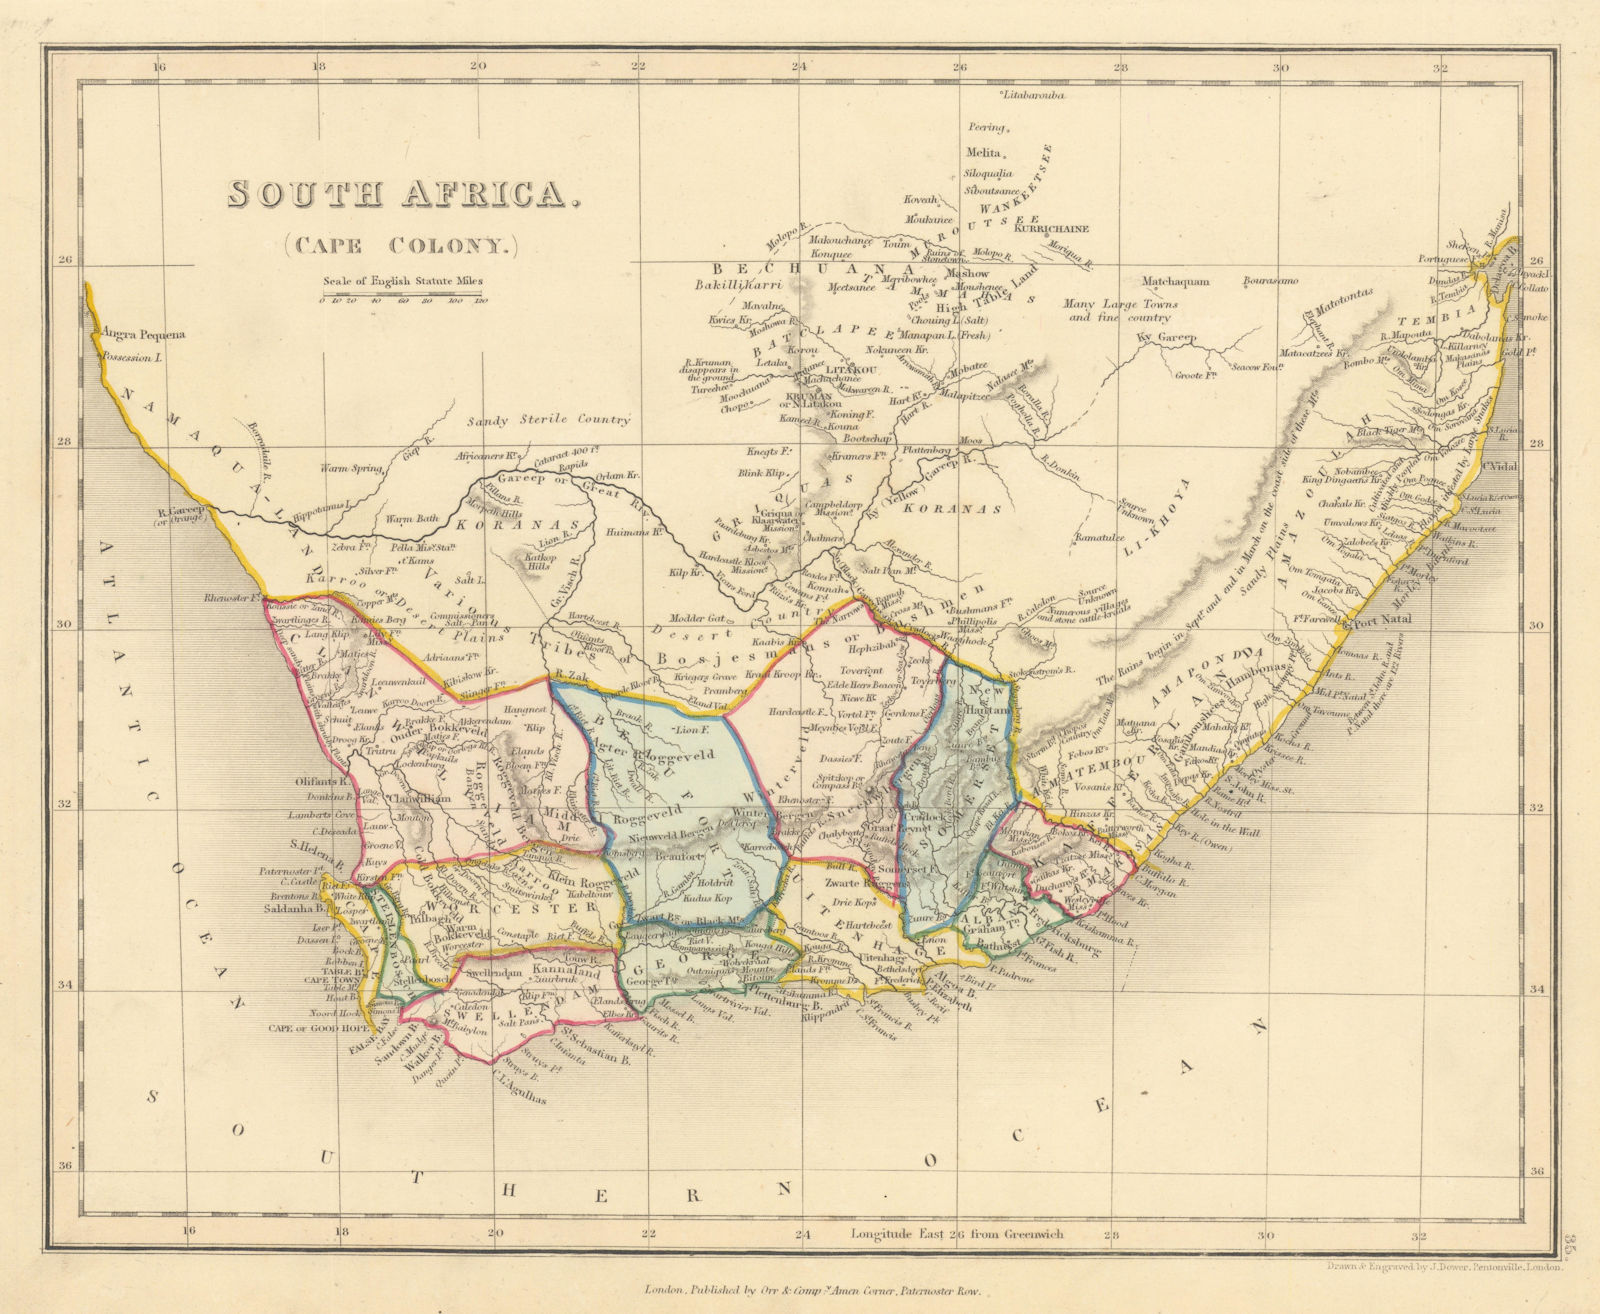 Associate Product South Africa (Cape Colony) by John Dower. Western Cape regions/counties 1845 map